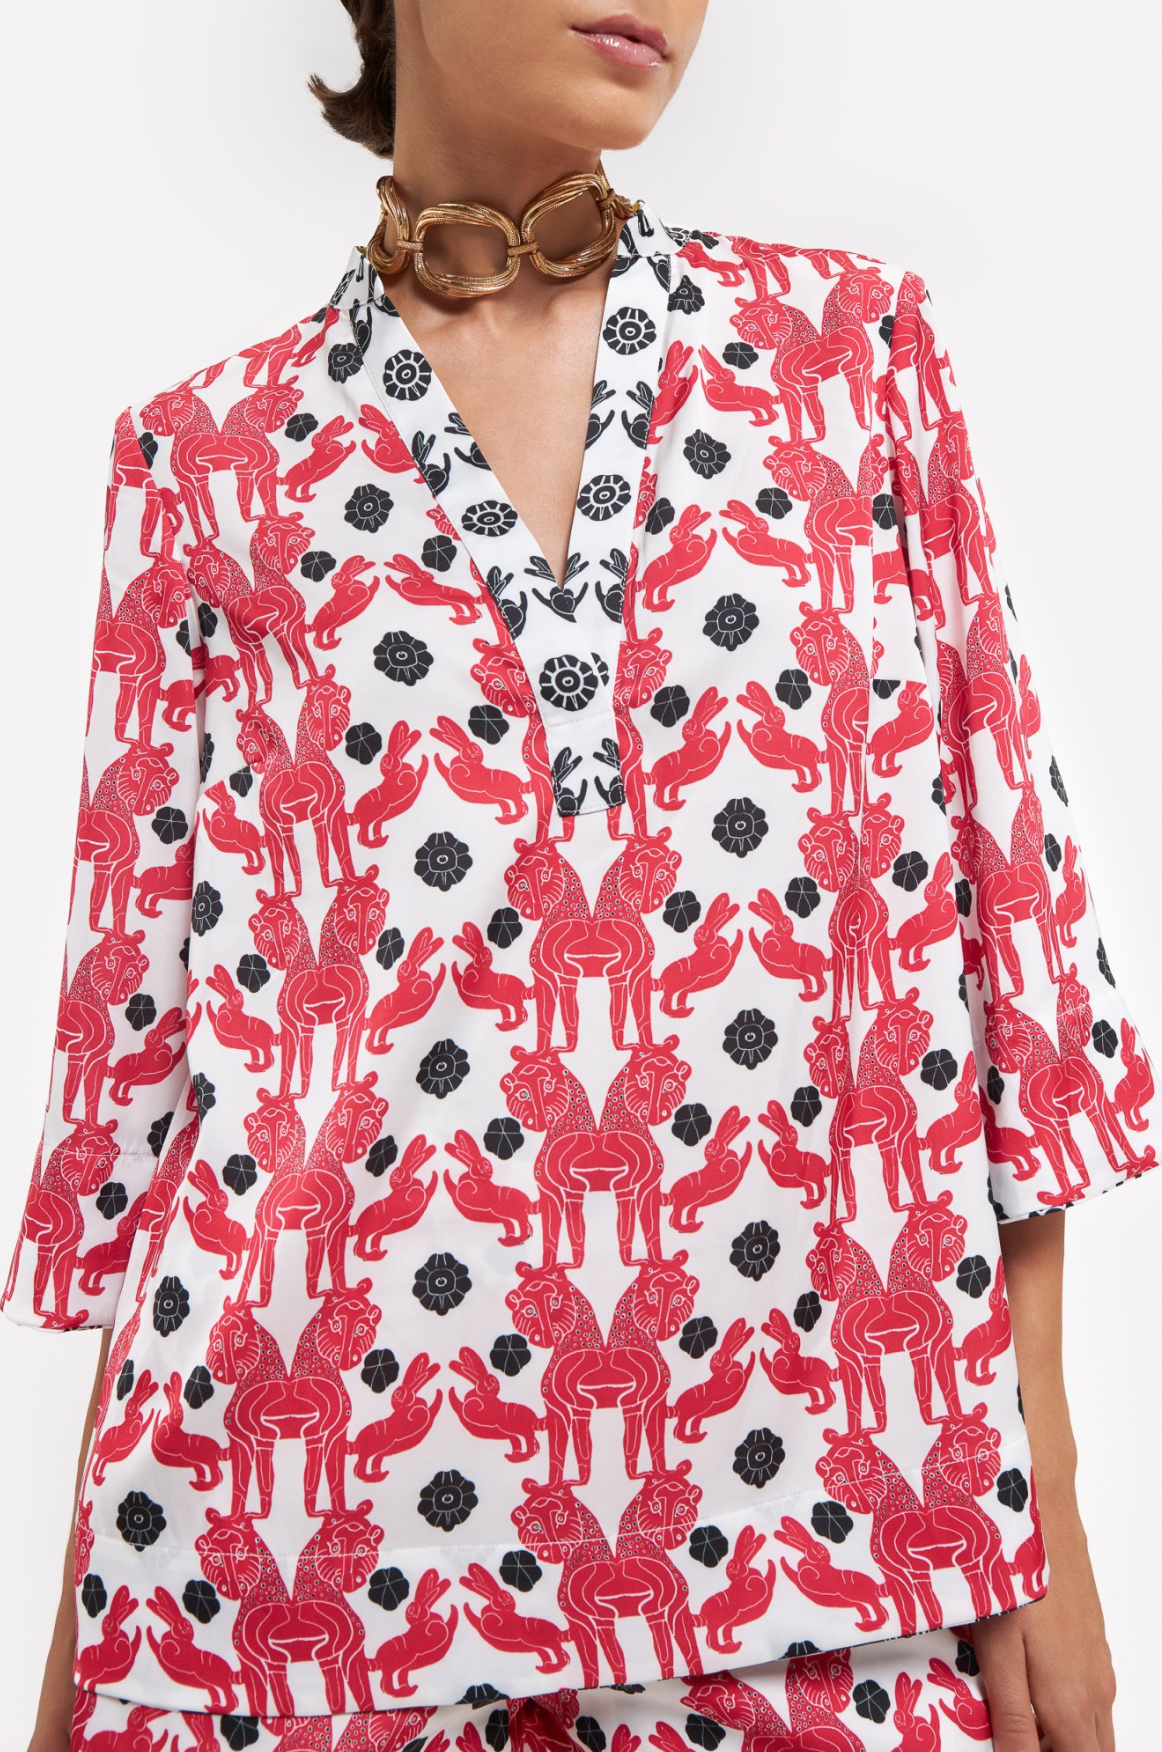 Nafsika Blouse in Black/Red/White Print